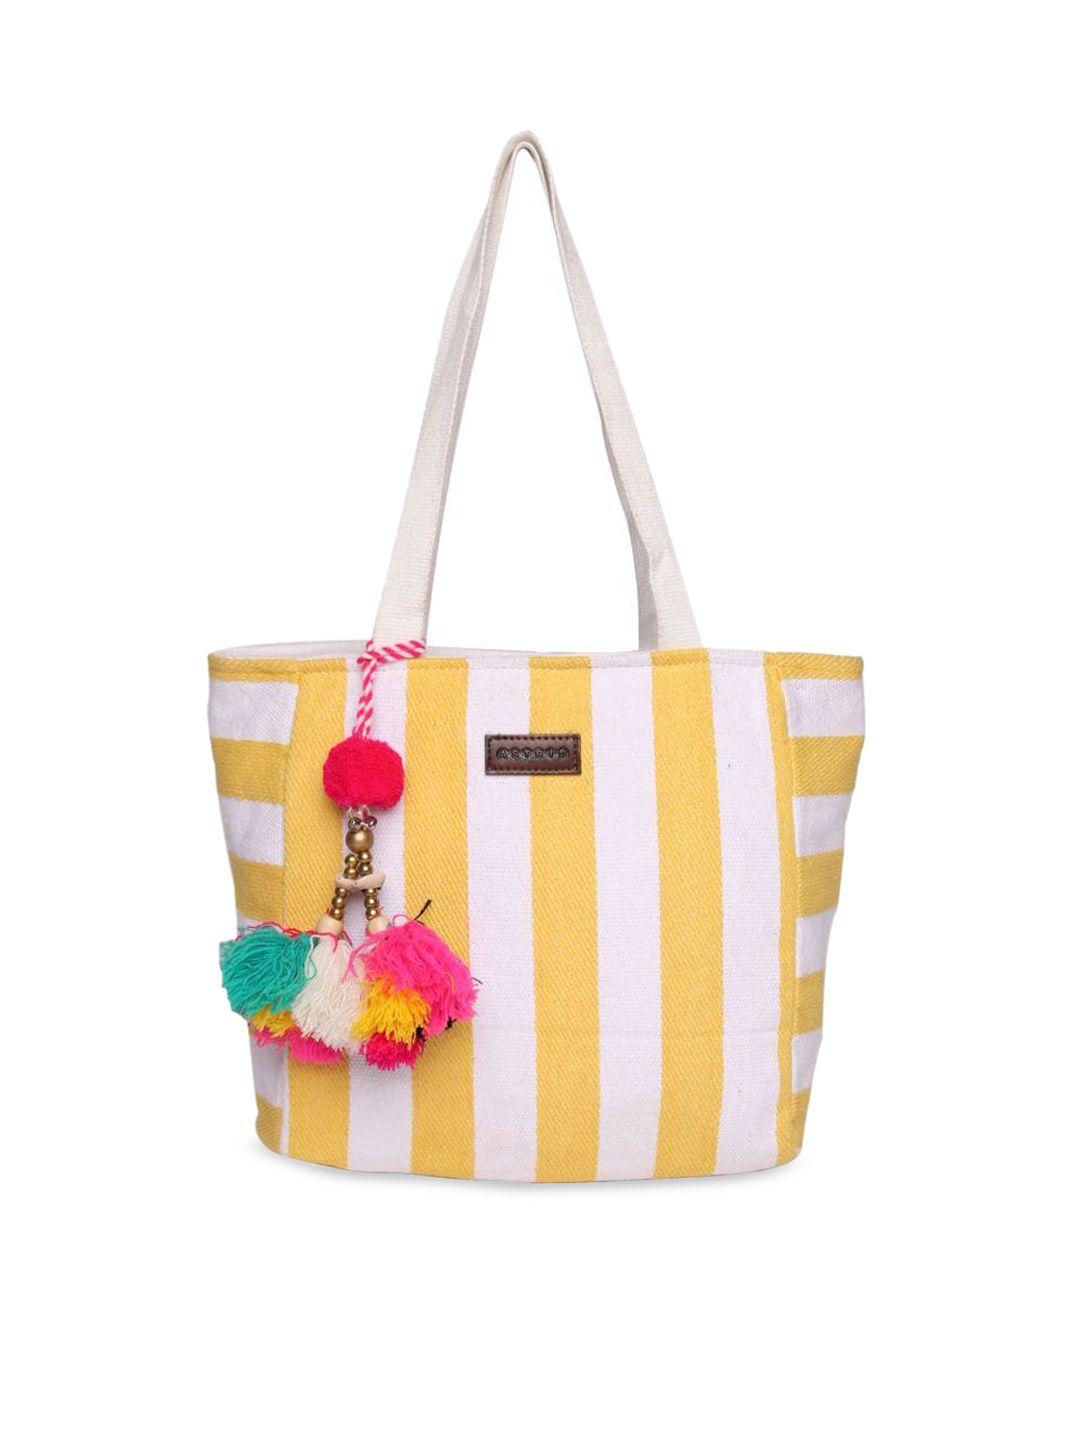 astrid yellow & white striped shopper tote bag with tasselled